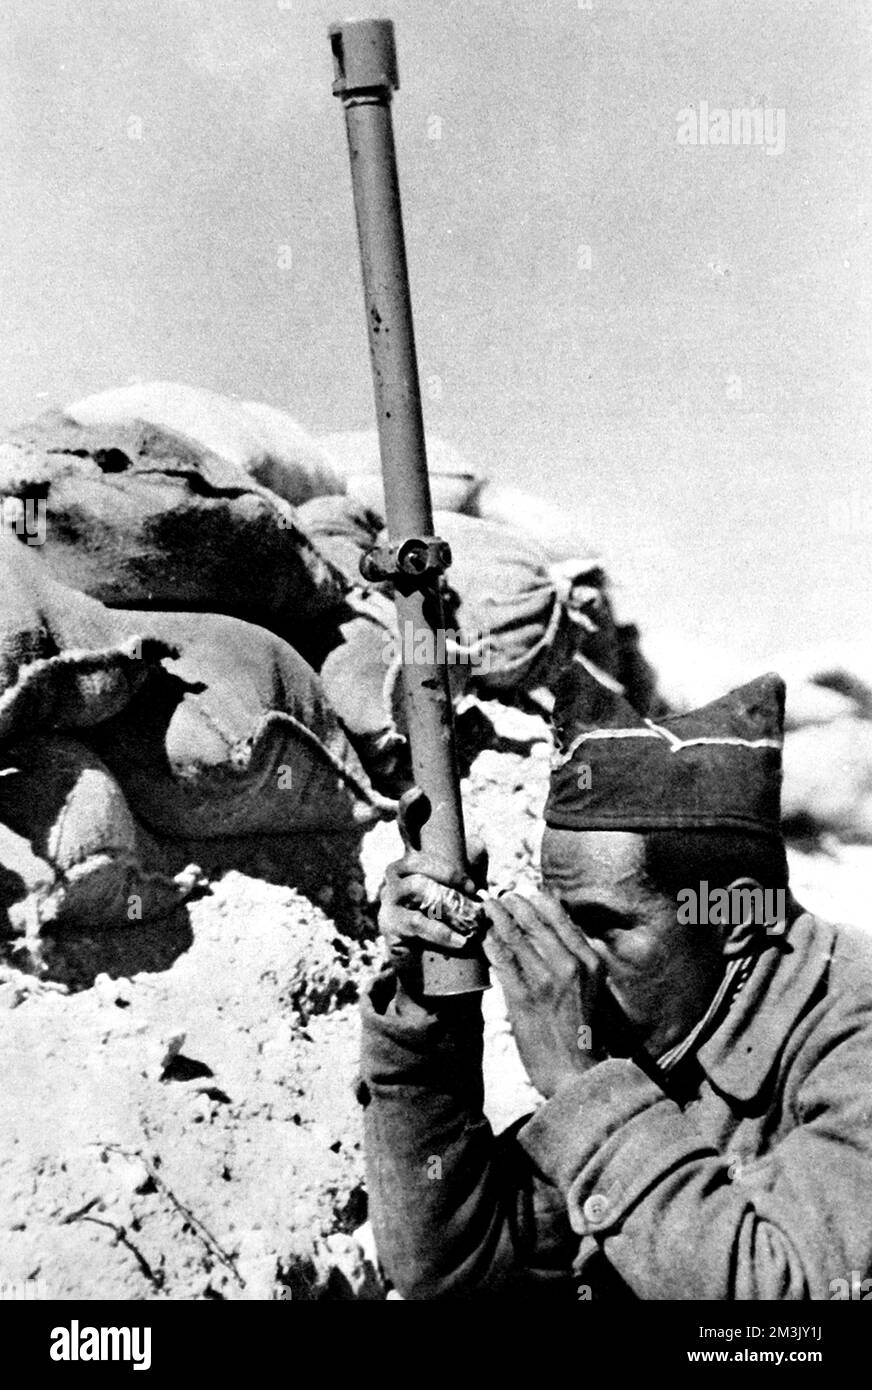 Soldier from the Philippine Islands serving in the Abraham Lincoln Battalion of the International Brigade, during the Spanish Civil War. This soldier is shown using a periscope to view the landscape towards the enemy, Nationalist, positions.  The International Brigade was a volunteer force which supported the Republican Government during the Spanish Civil War. Volunteers came from all over Europe and North America; the Abraham Lincoln Battalion had men from Cuba, Mexico, the Philippines, Canada and the USA.  1937 Stock Photo